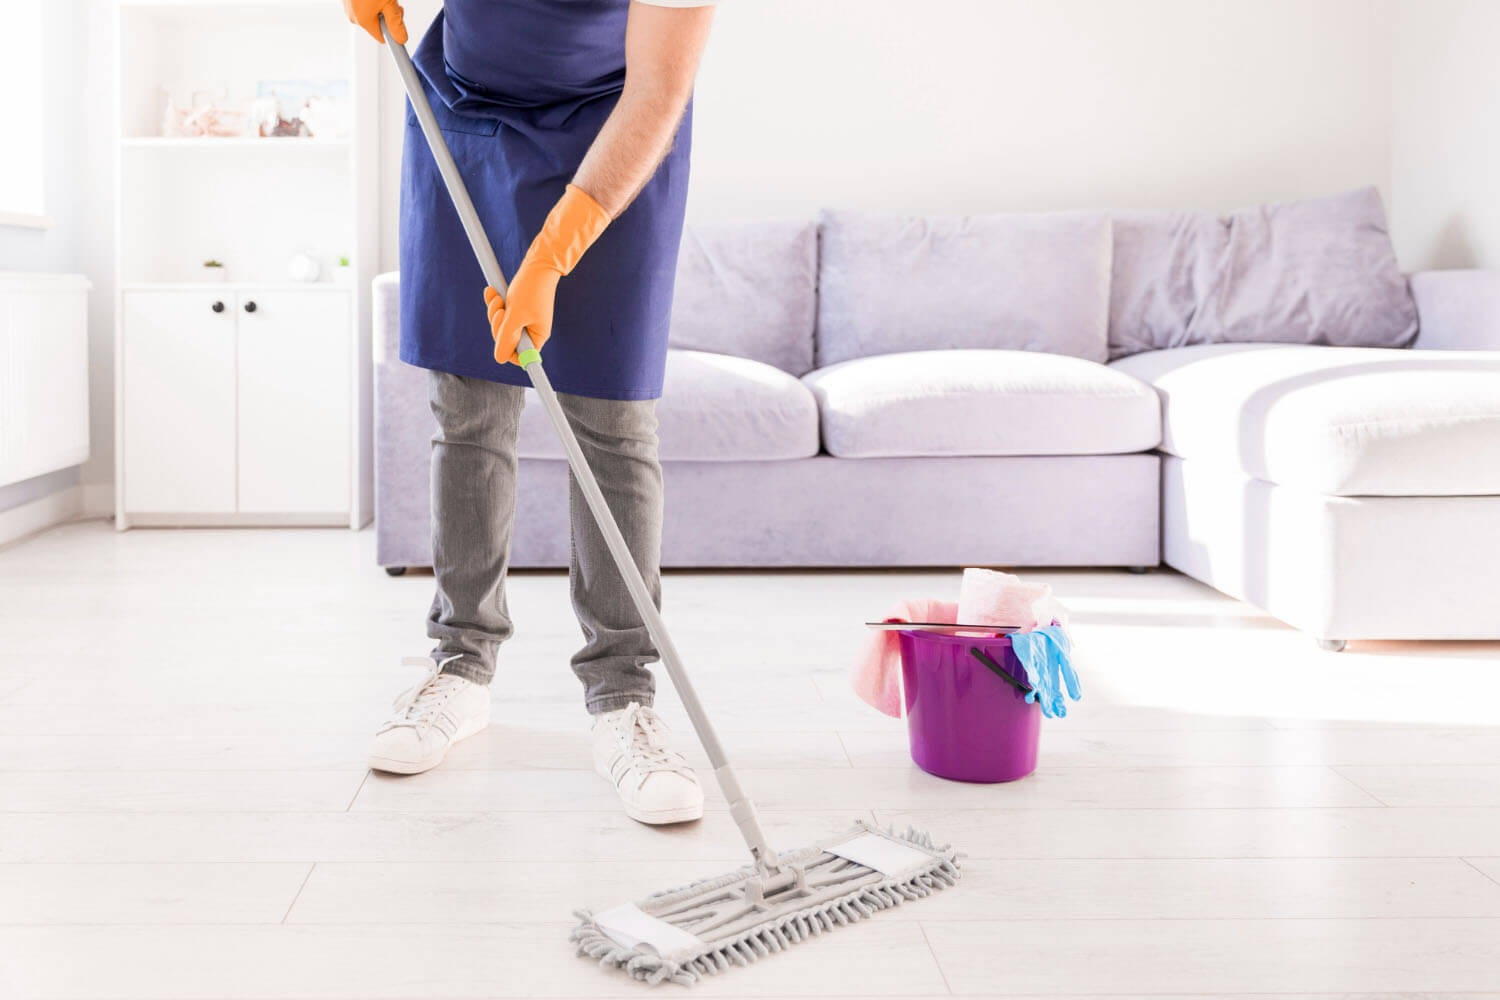 professional cleaner is mopping the floor with a basket full of cleaning tools